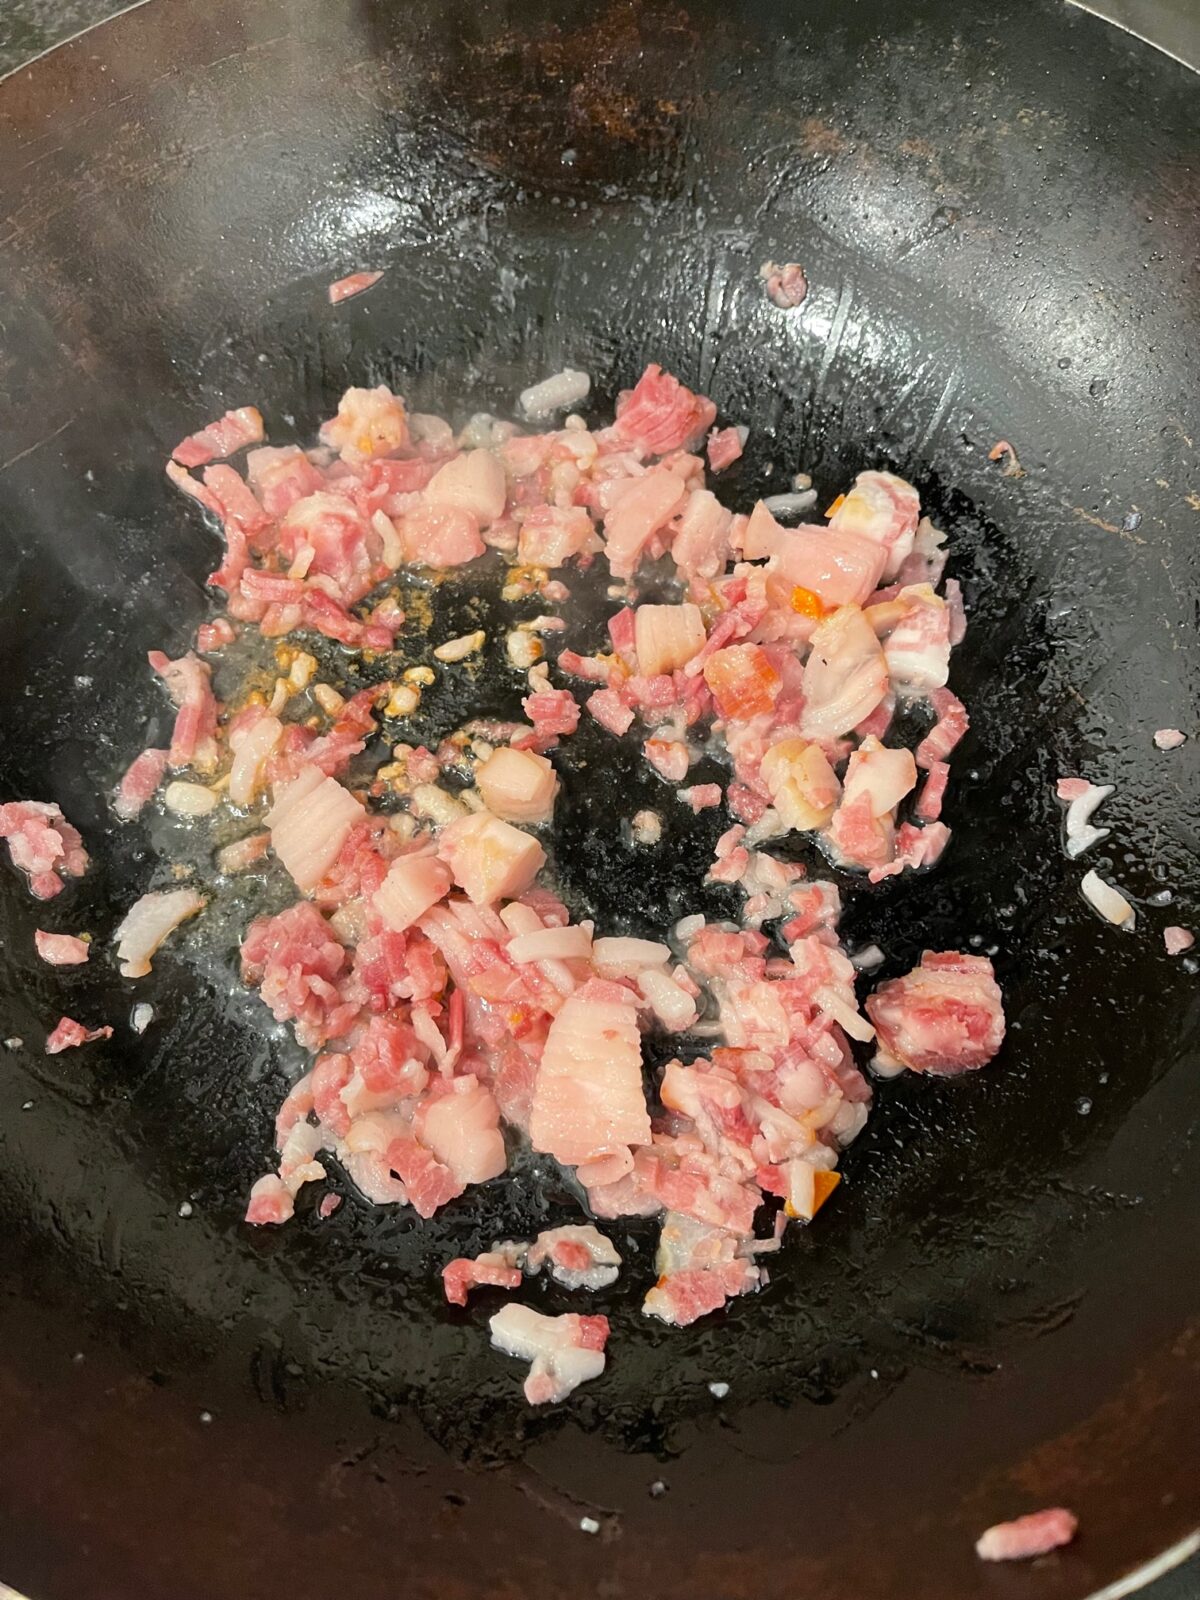 Bacon in the wok